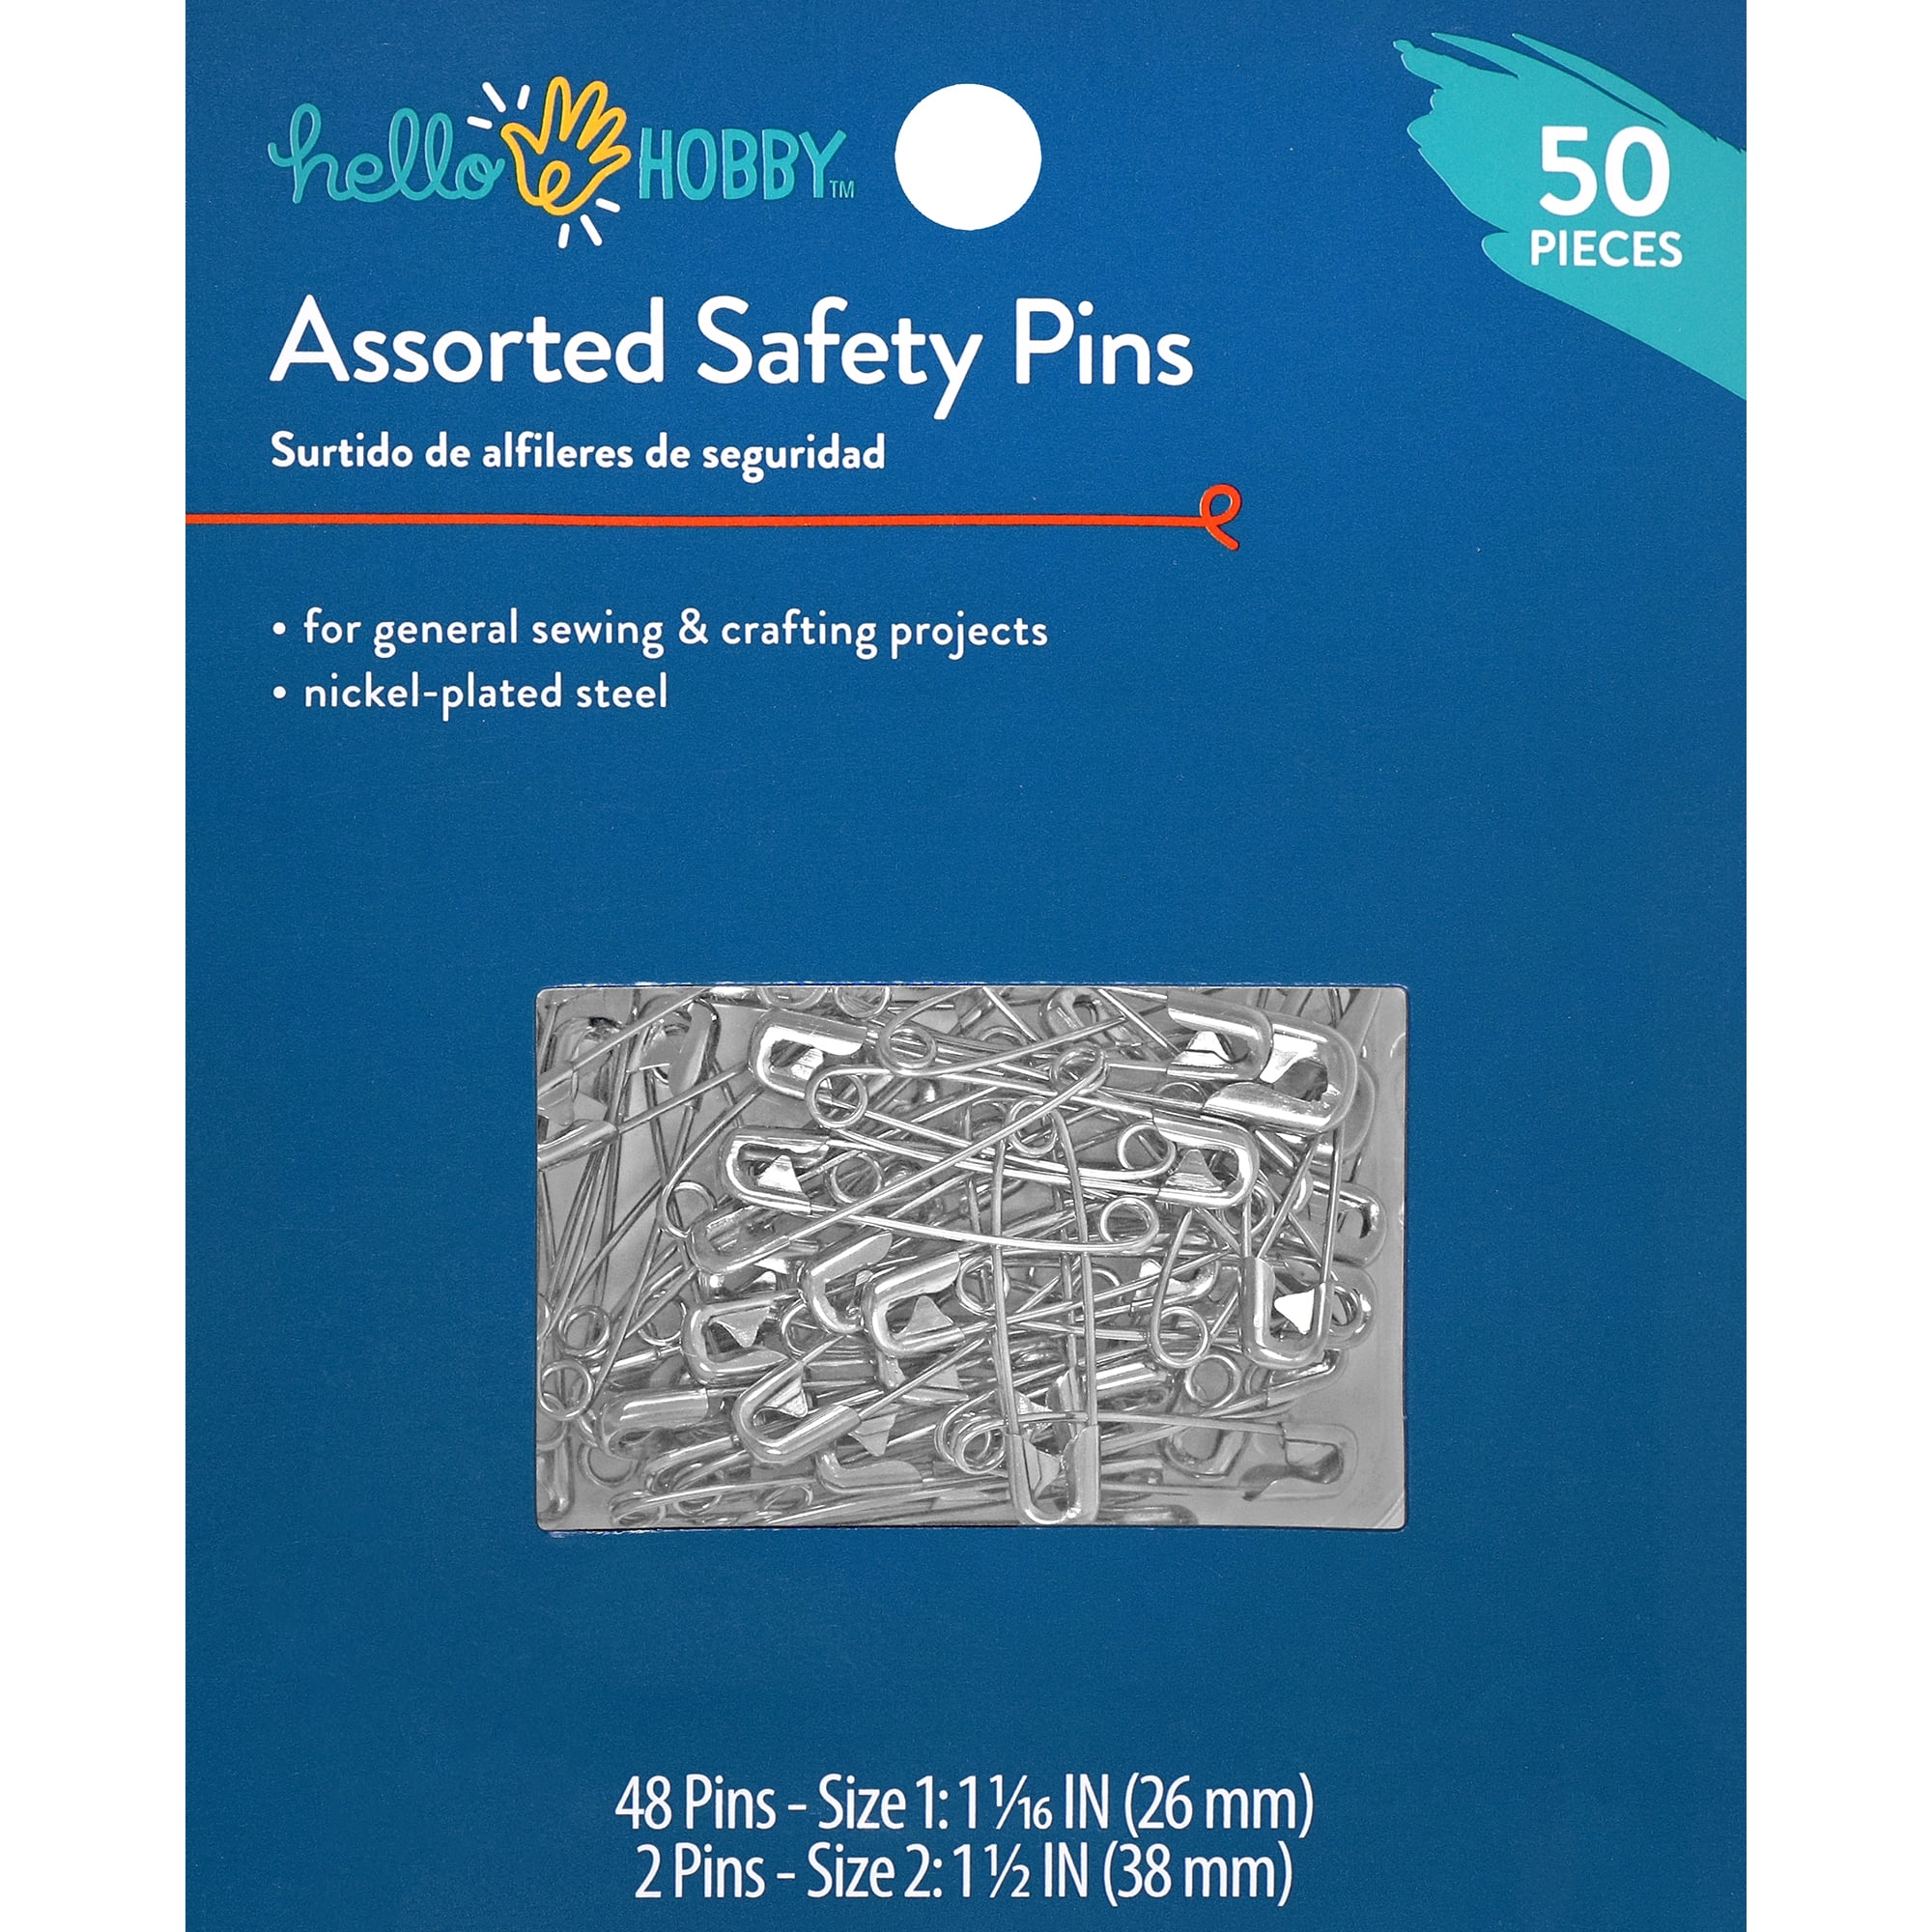 Hello Hobby Assorted Safety Pins, Sizes 1 and 2, 50 Count